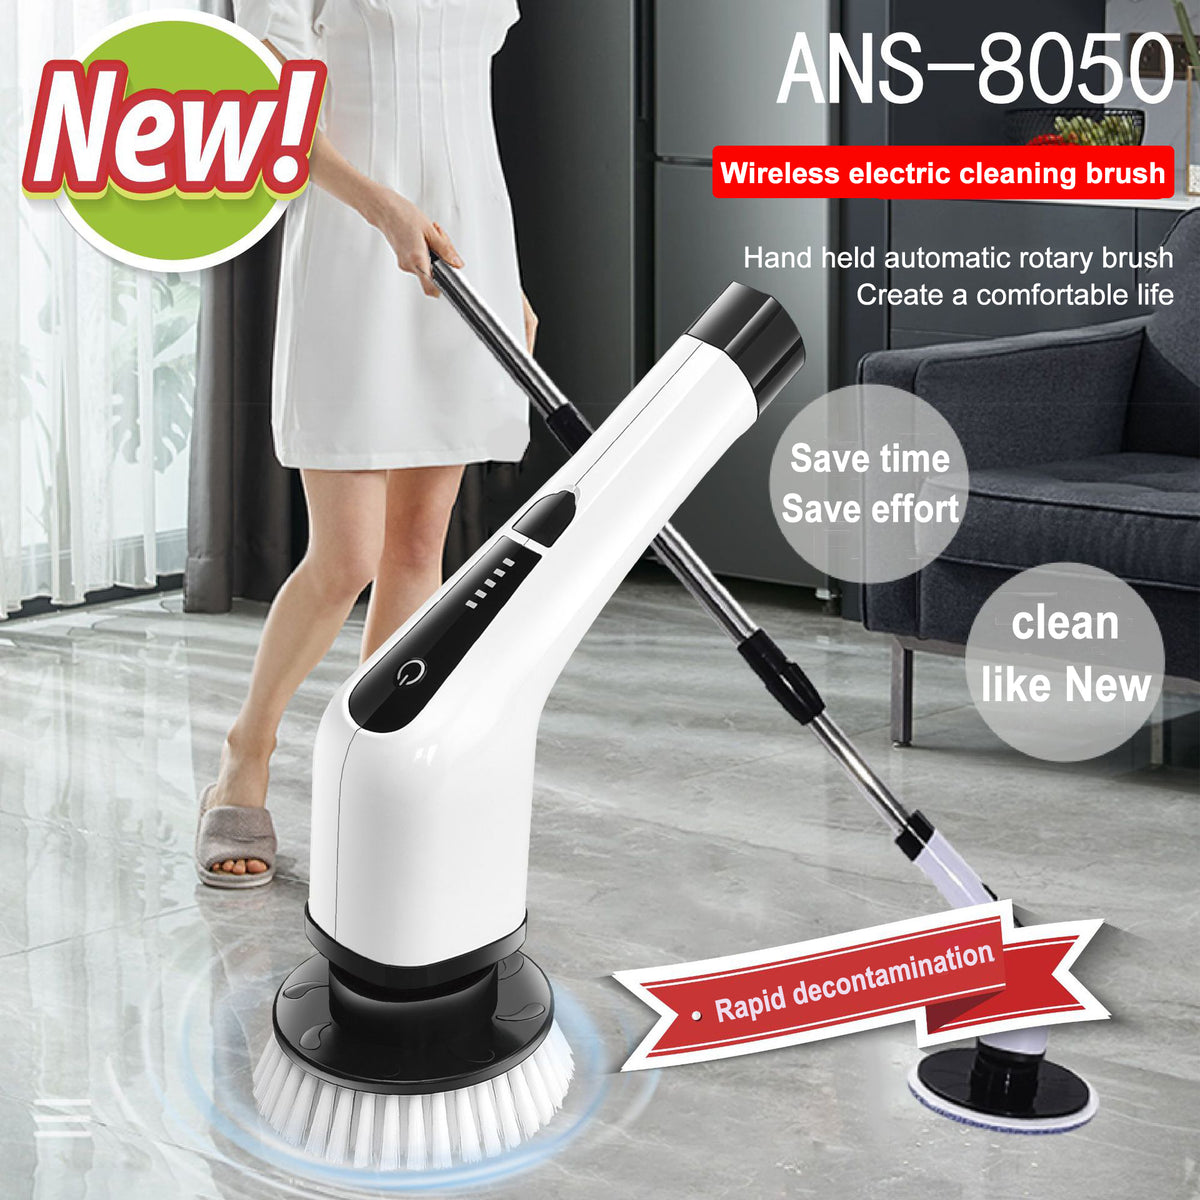 Super Scrubber™ - Electric Brush/Scrubber - The Waterfall Room